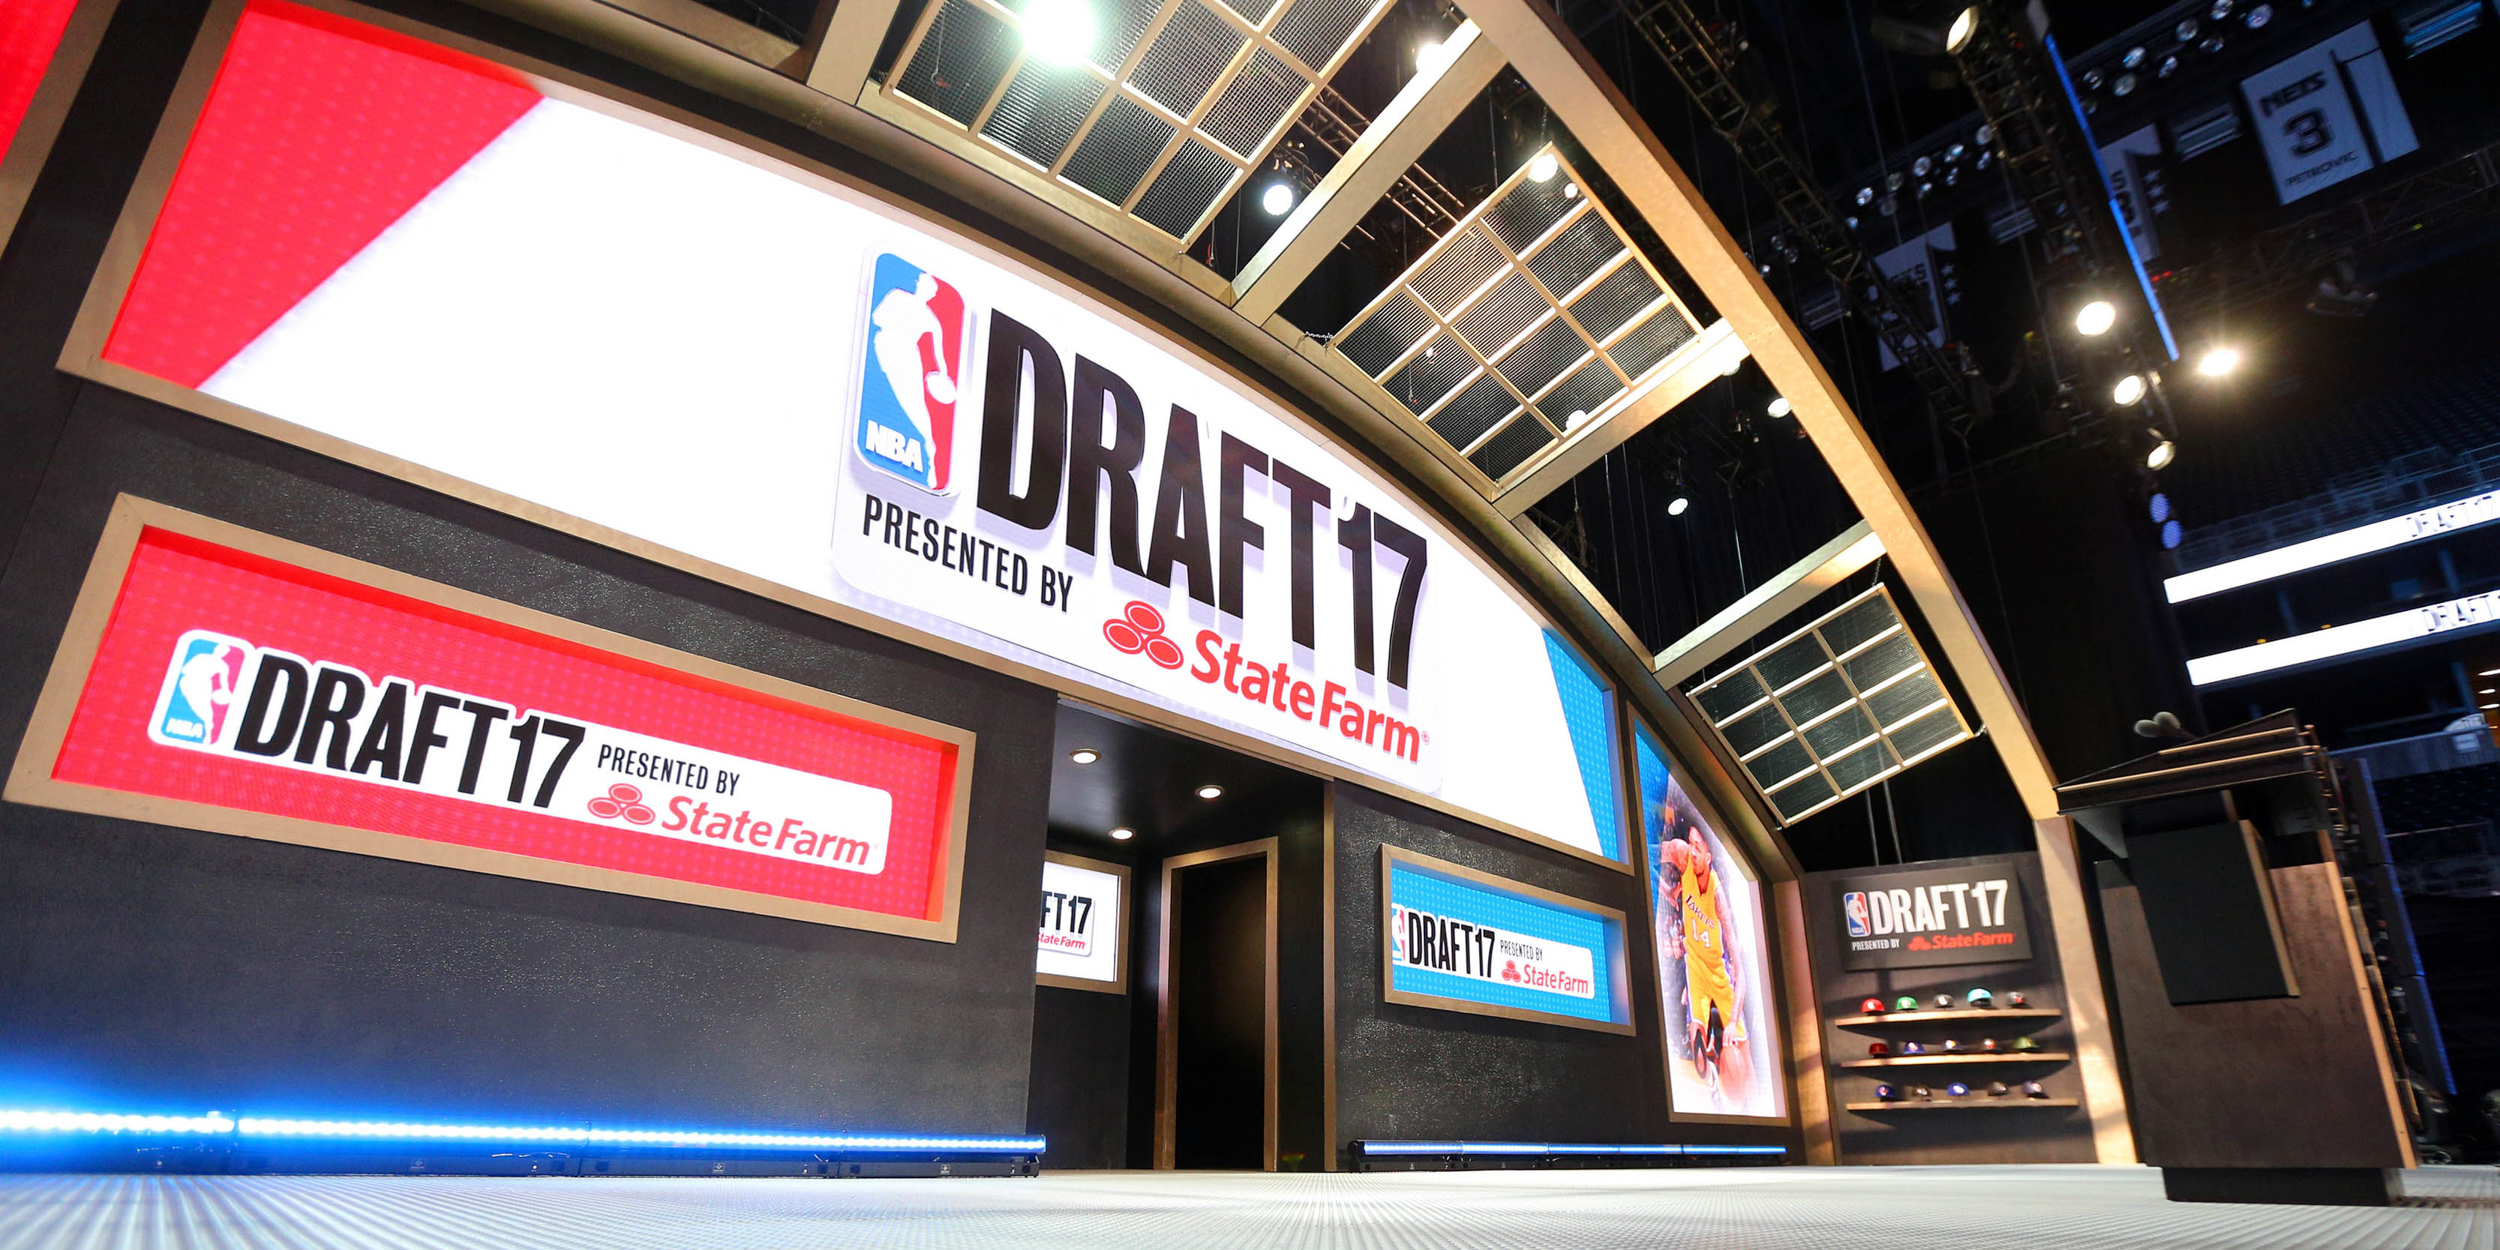 How to stream the 2018 NBA Draft live on Chromecast, Android, Chrome OS, and Android TV